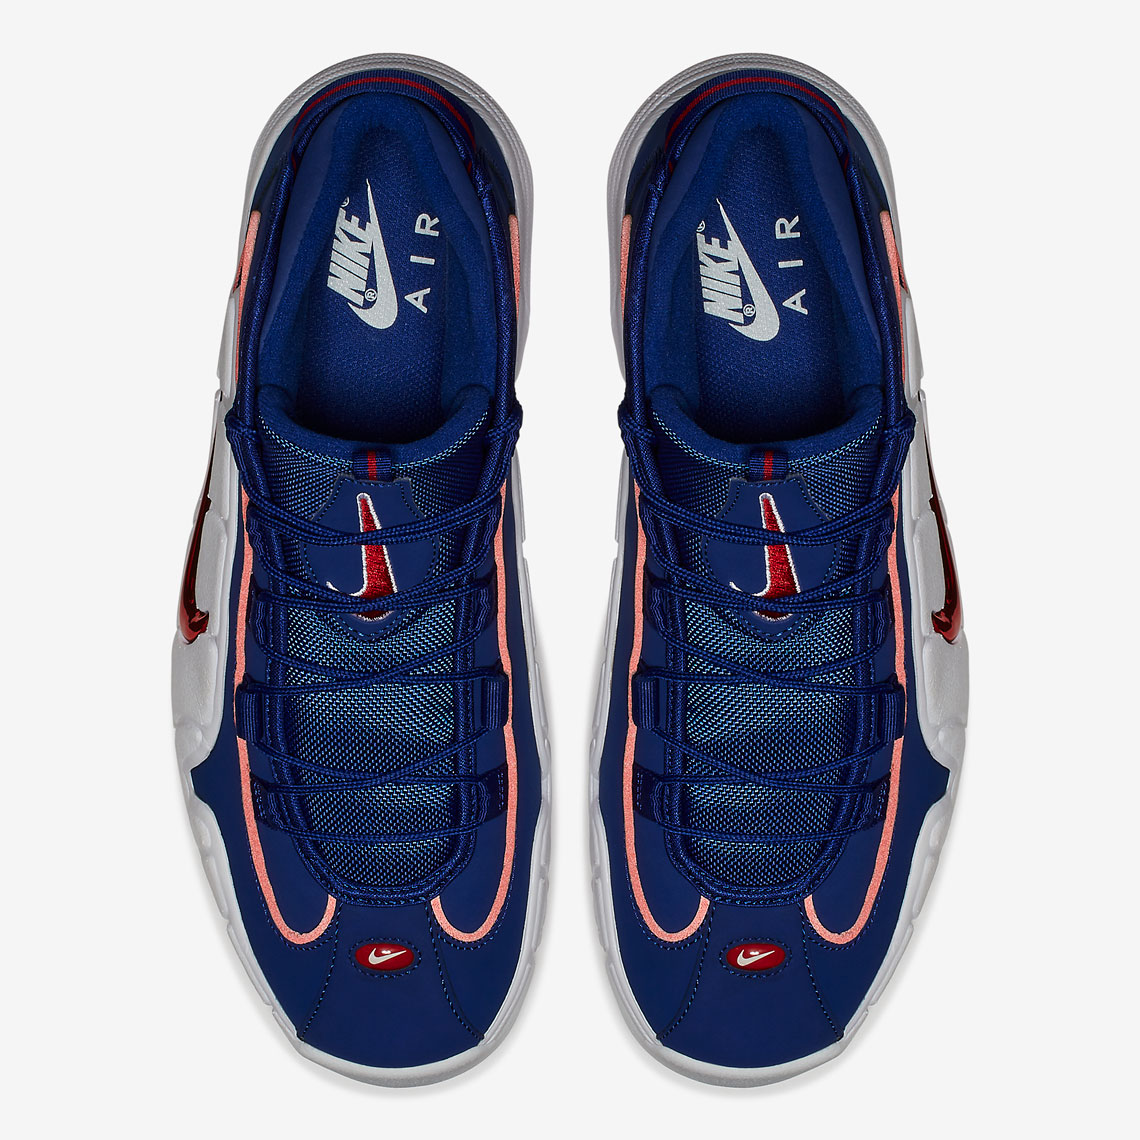 Nike Air Max Penny 1 Lil Penny 12